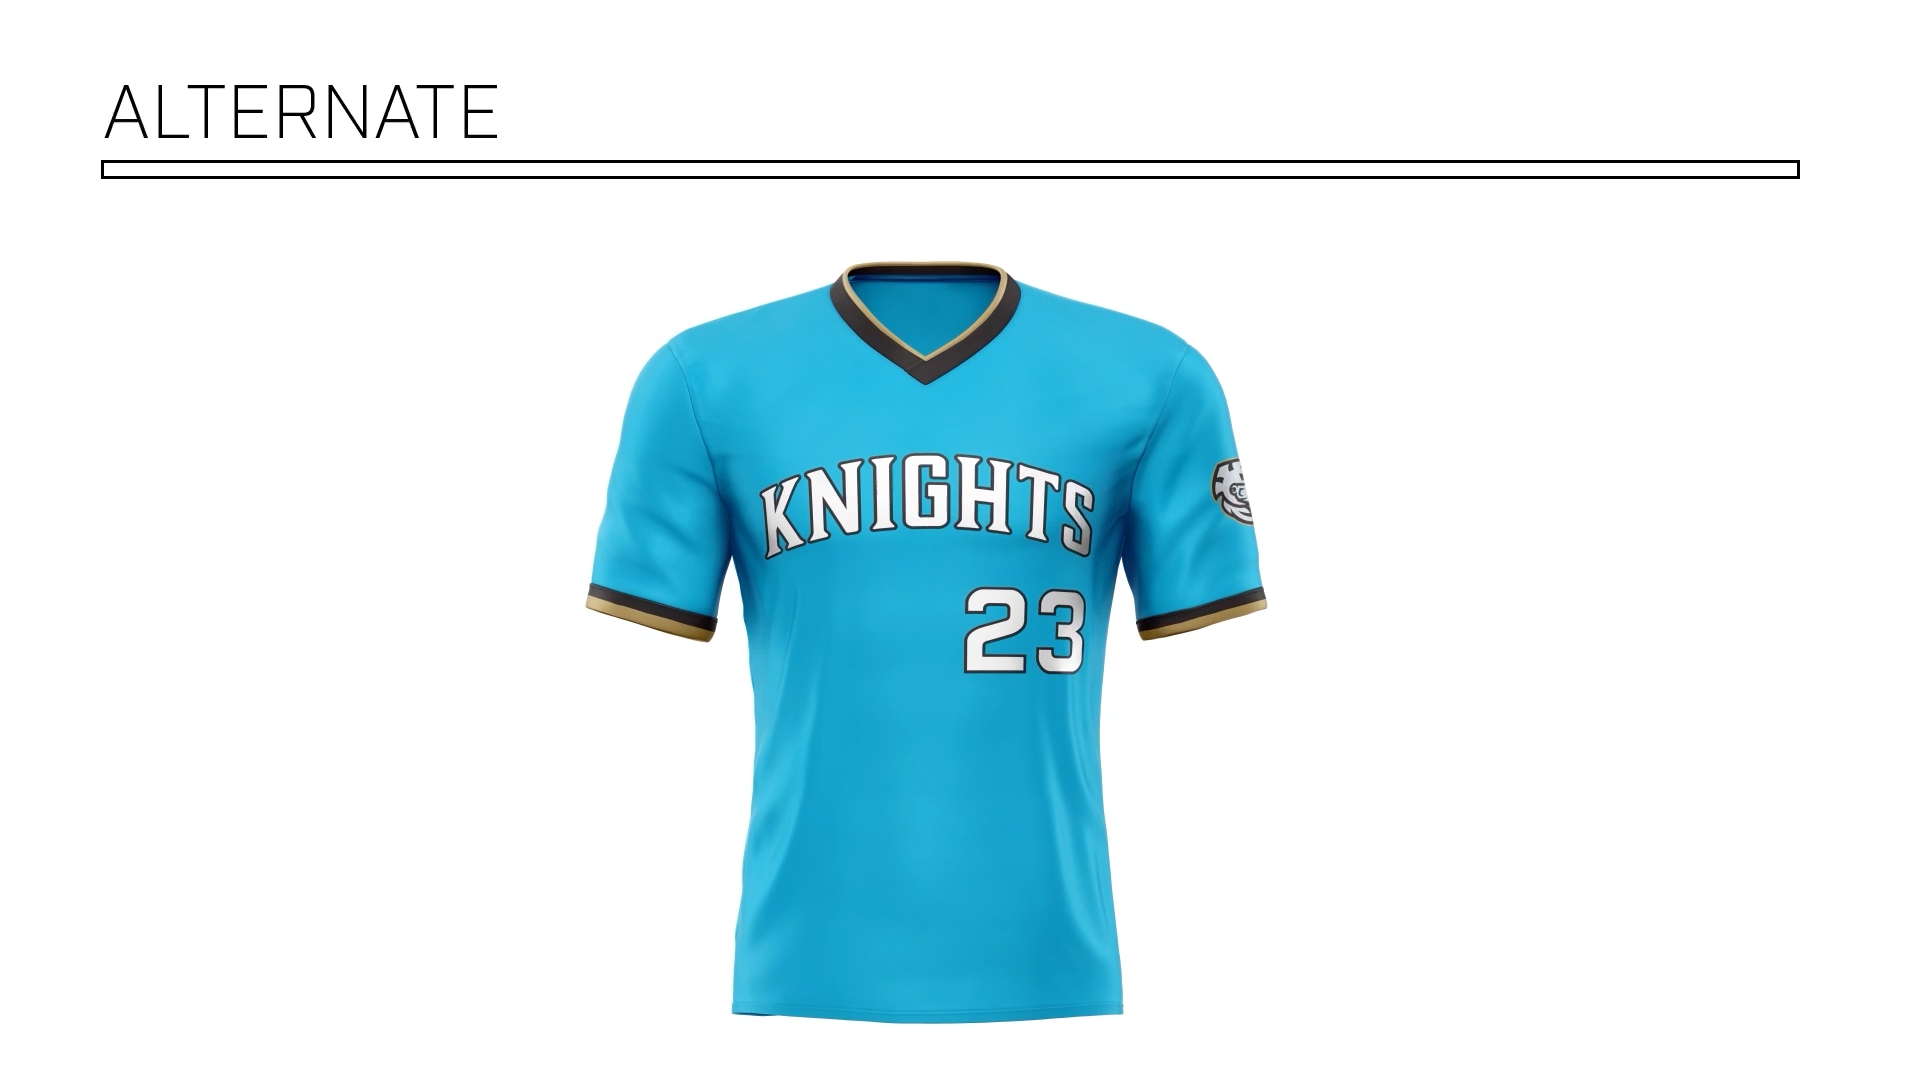 CLTure® (culture) on Instagram: The Charlotte @Knights have officially  rebranded to a blue uniform color scheme! A long-awaited move for the  Triple-A franchise and Charlotteans, the team announced the change tonight  at